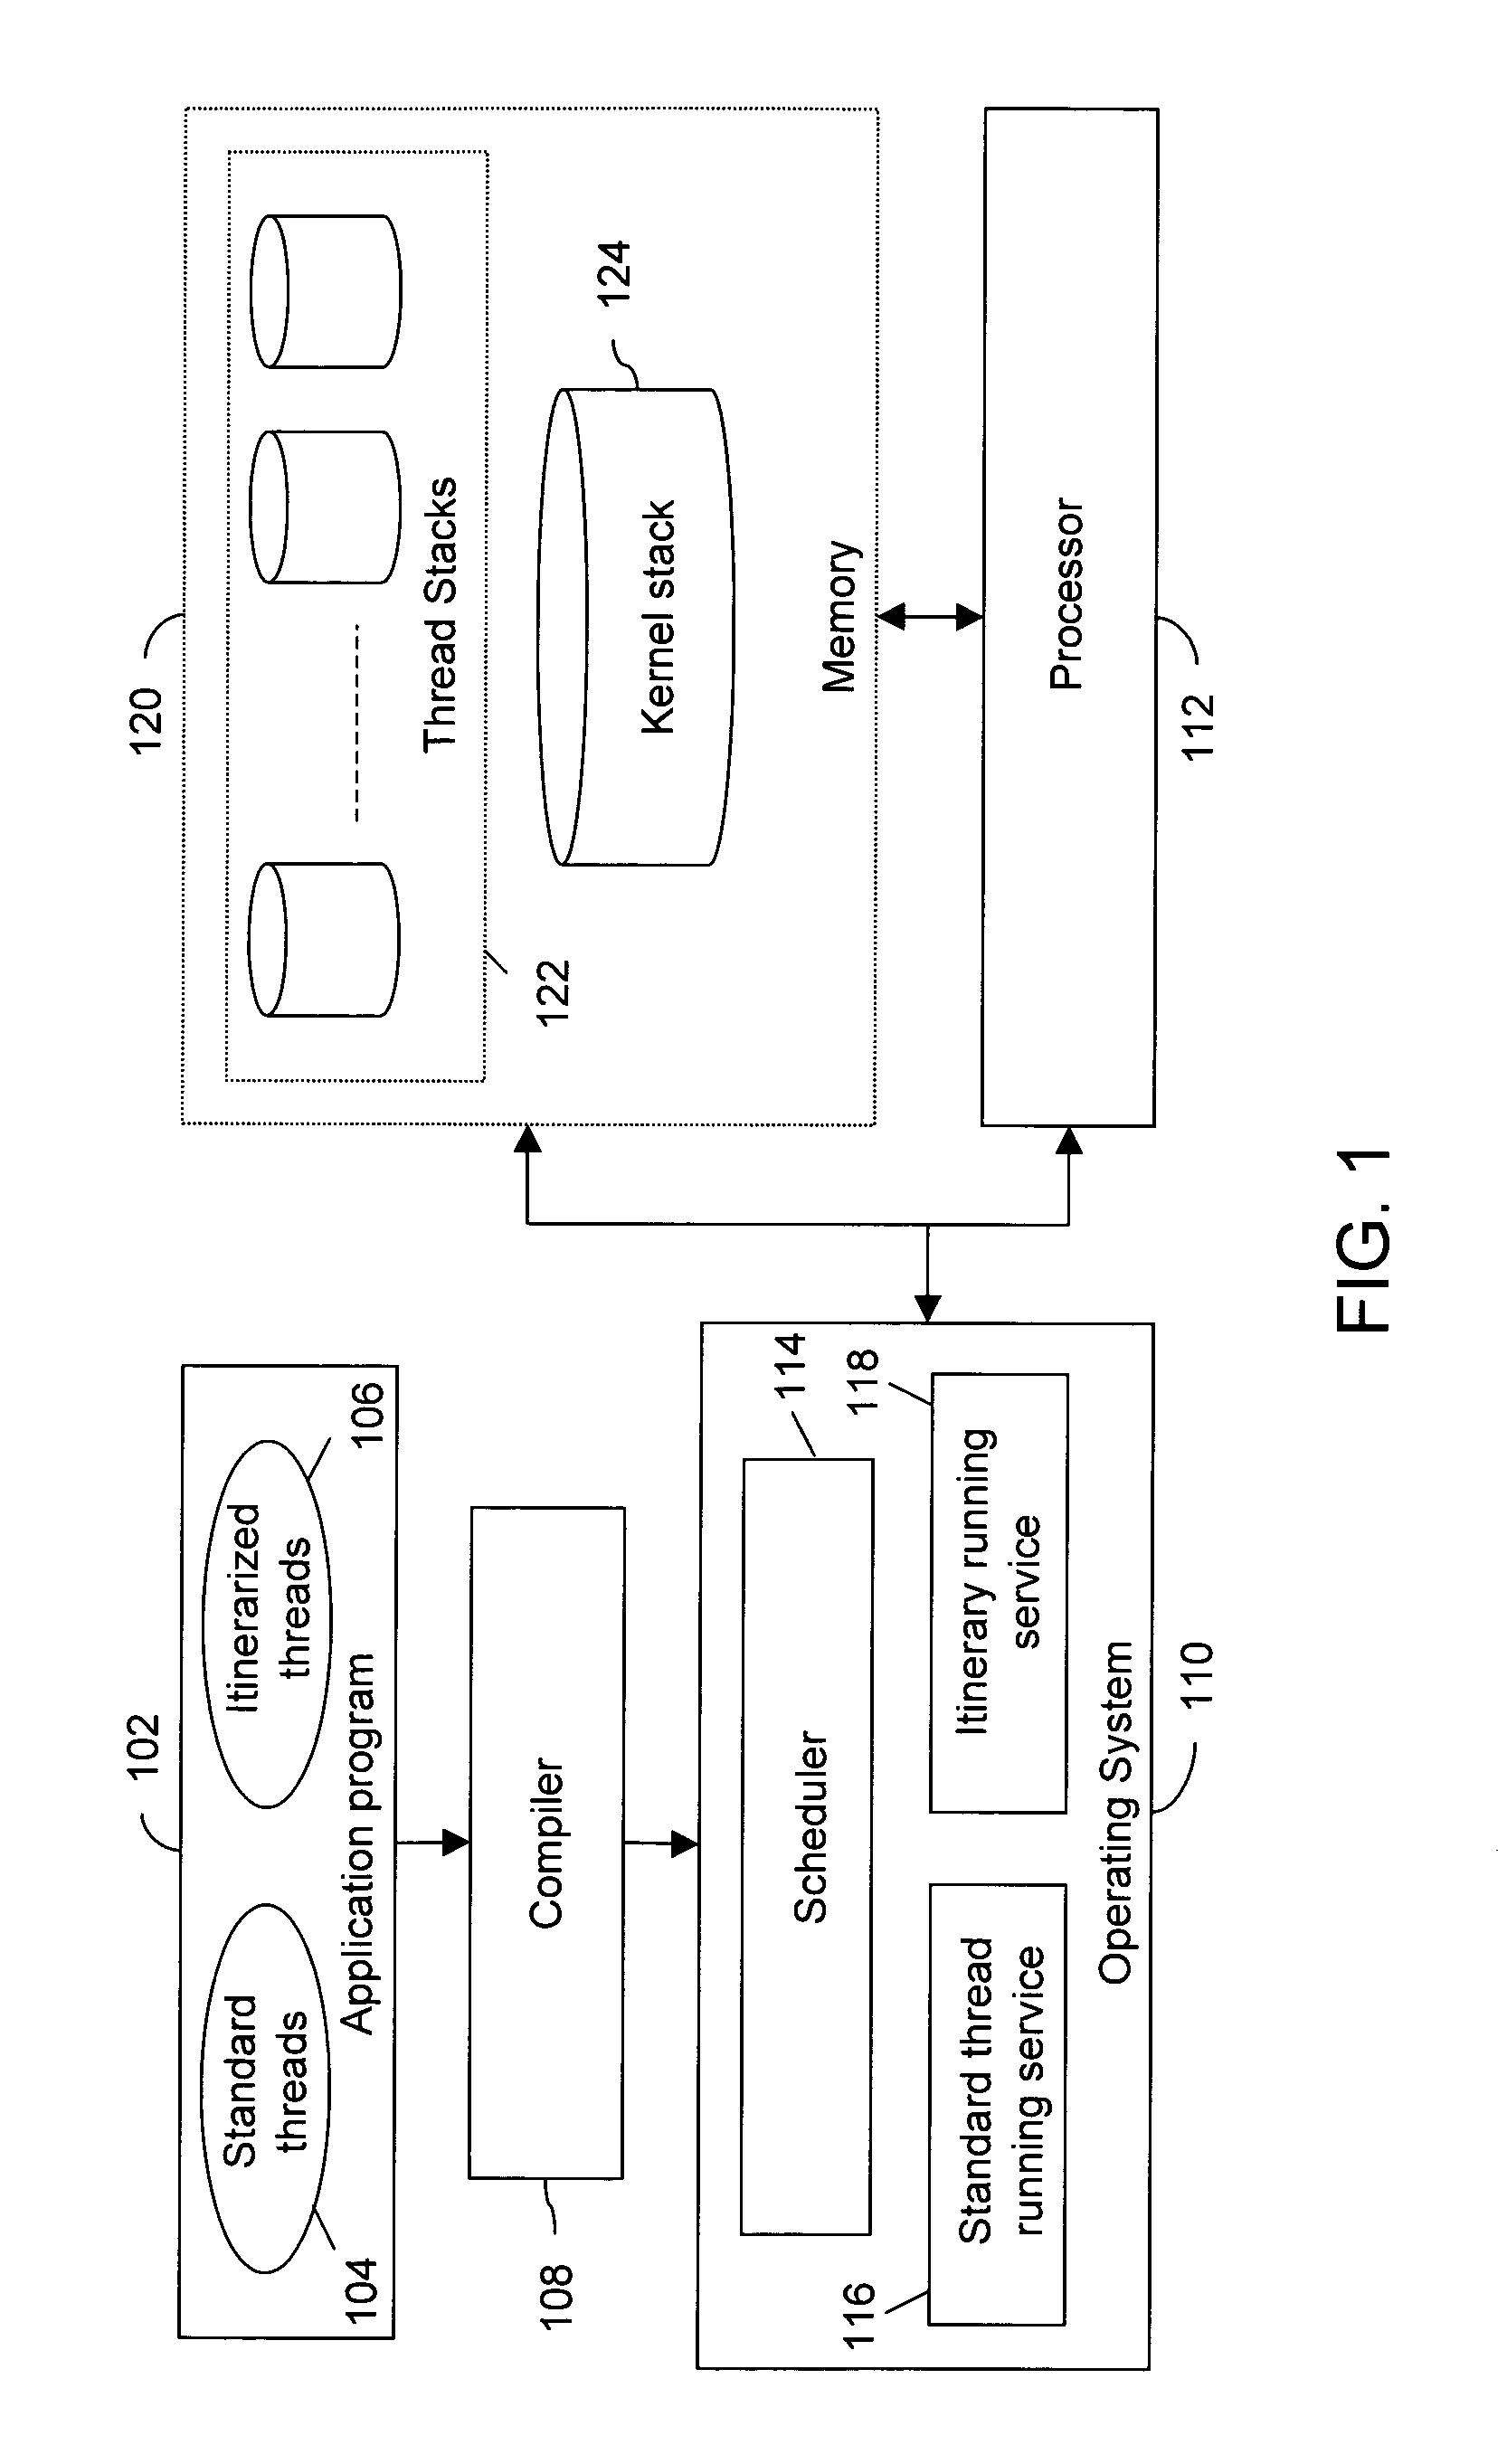 Method and system for multithreaded processing using errands